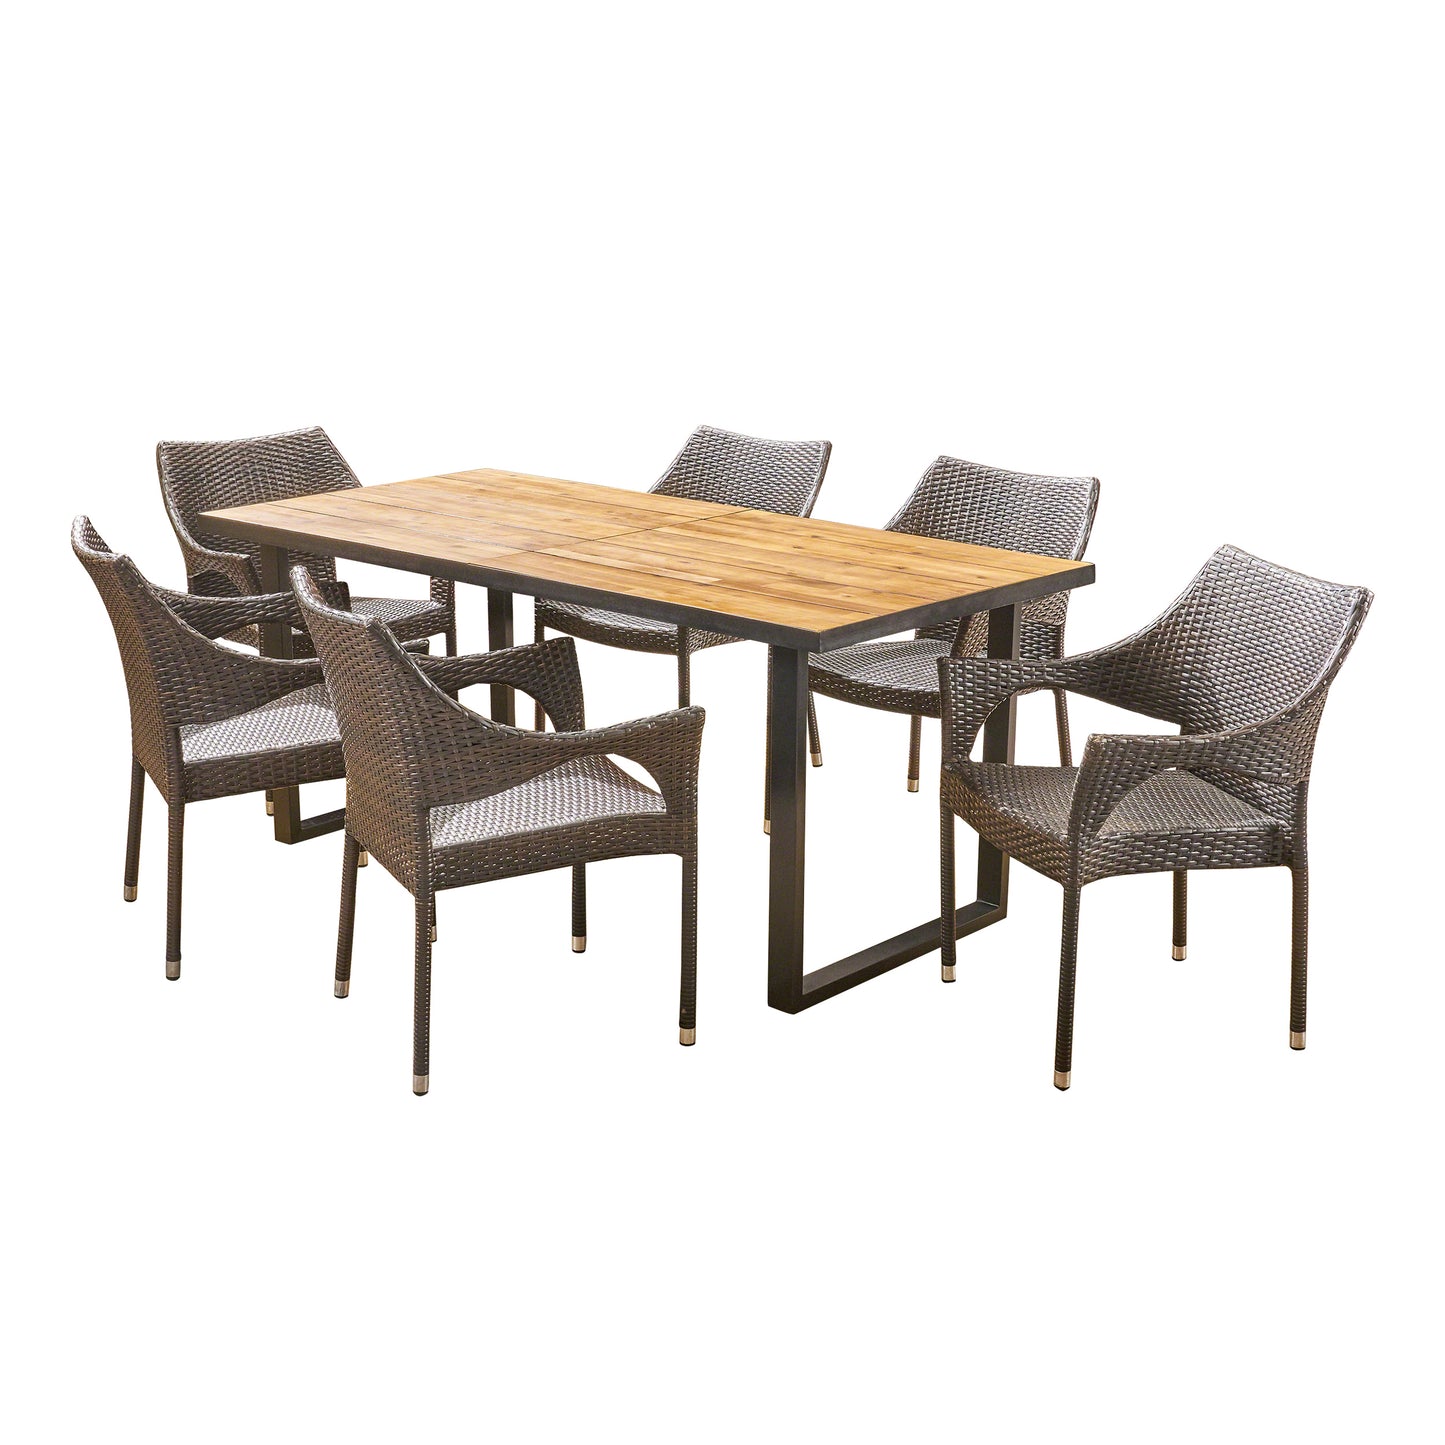 Indira Outdoor 6-Seater Rectangular Acacia Wood and Wicker Dining Set, Teak with Black and Multi Brown